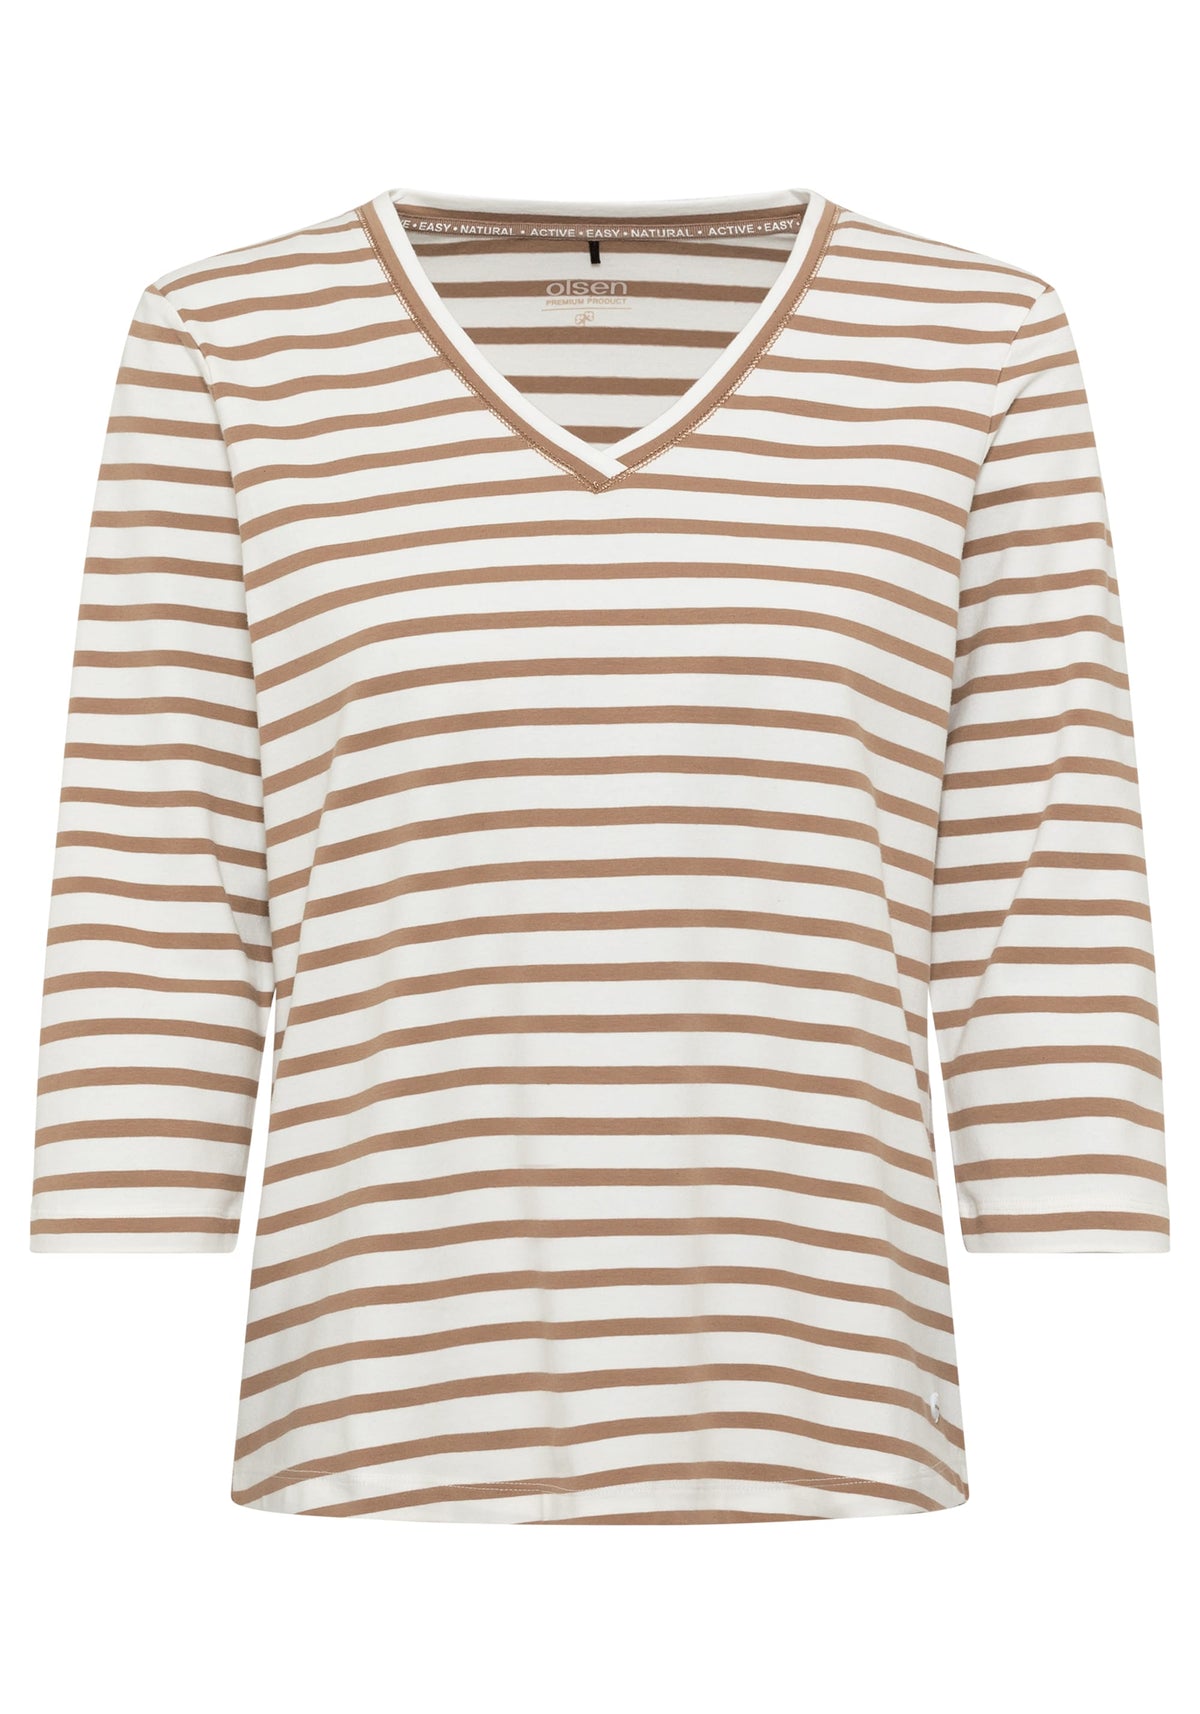 Cotton Blend 3/4 Sleeve Striped Tee